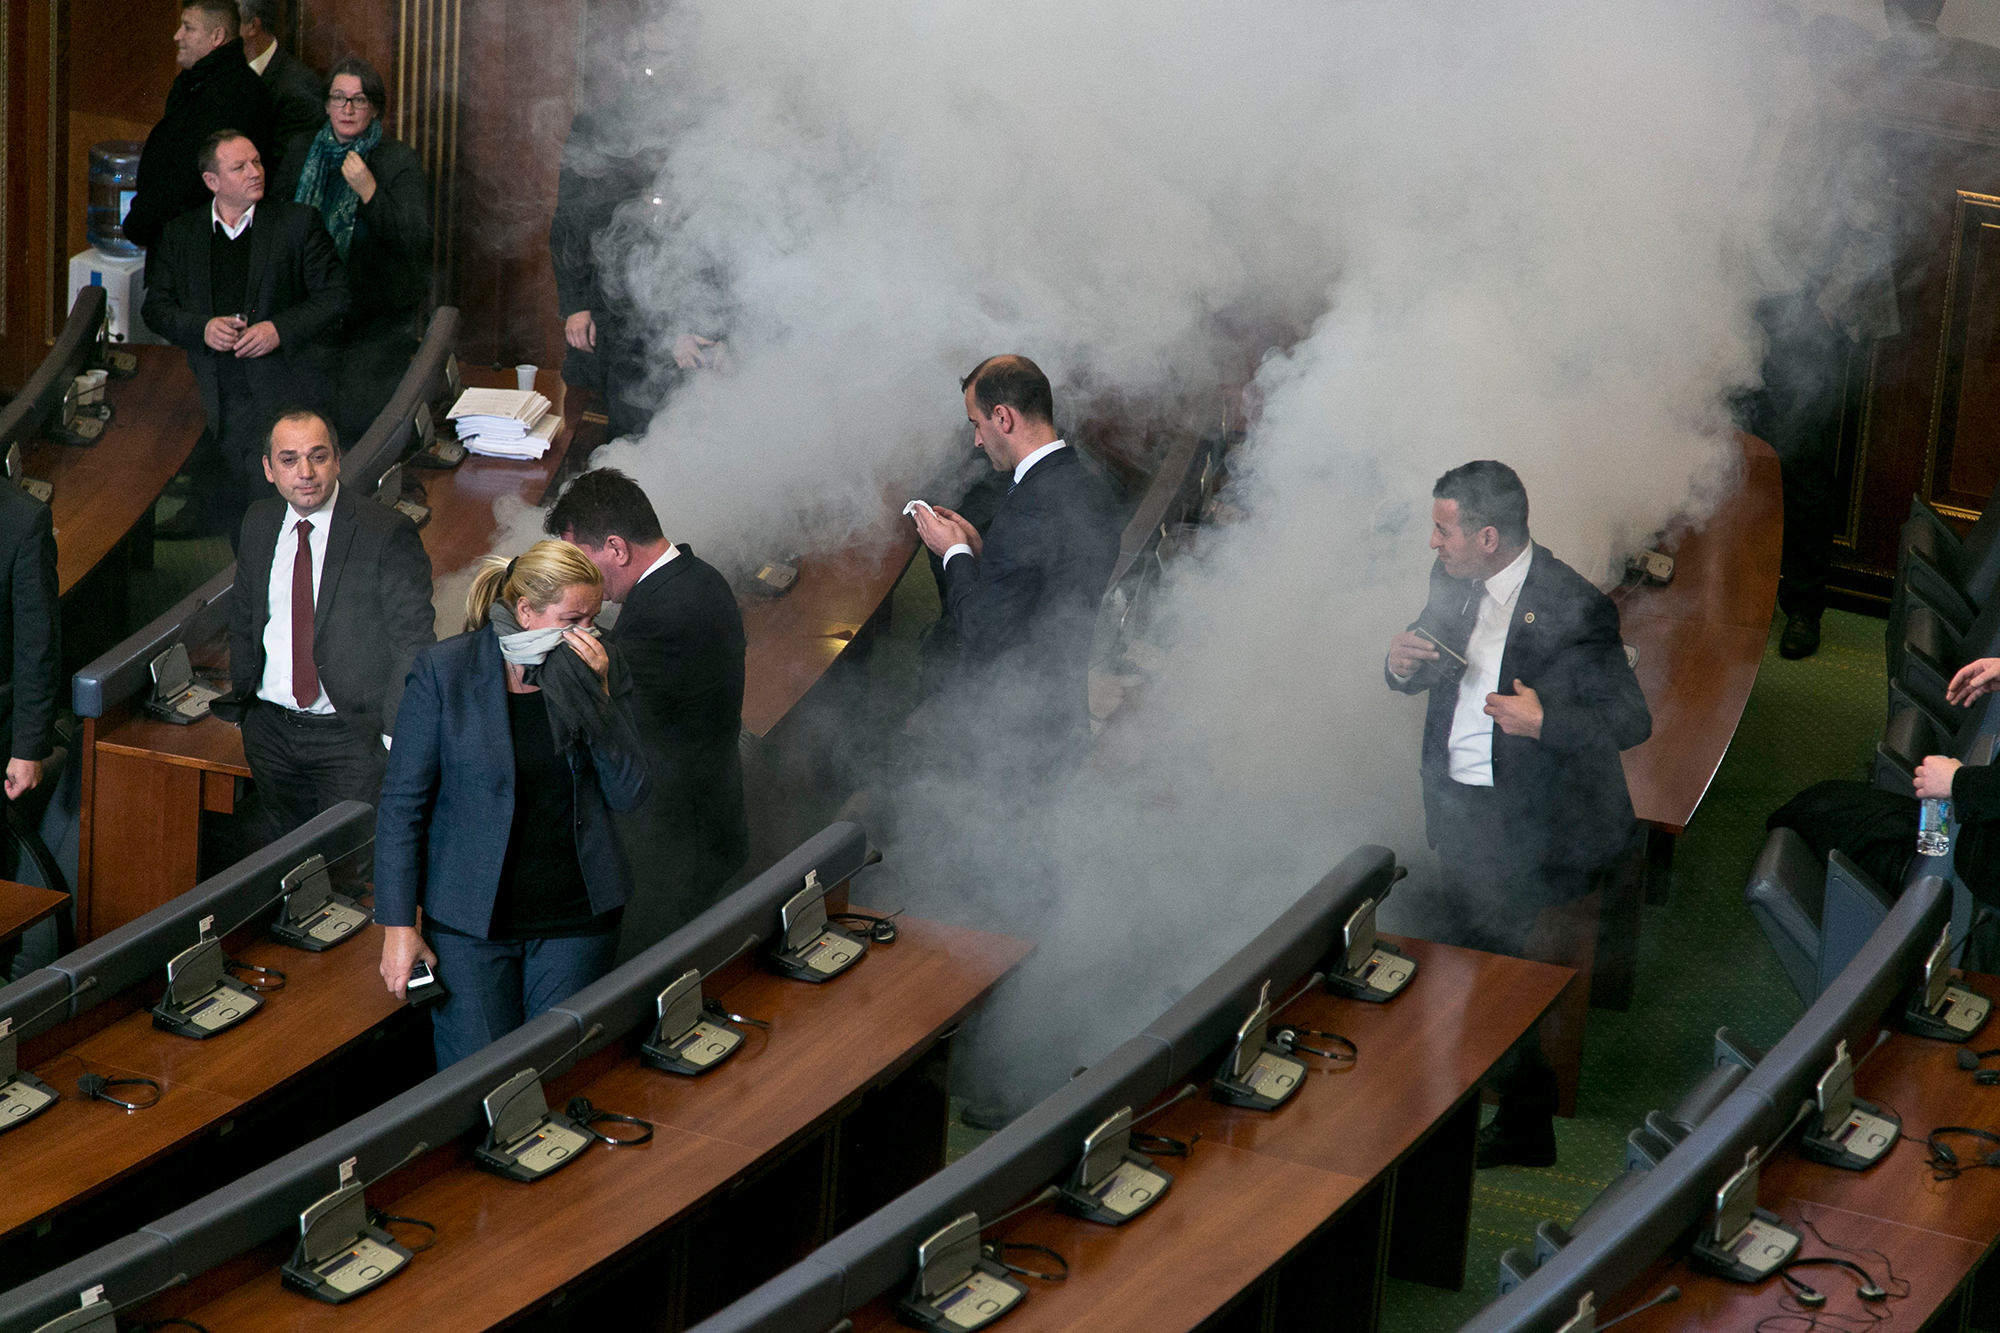 Lawmakers react as opposition lawmakers release tear gas canisters disrupting a parliamentary session in Kosovo capital Pristina on Monday Dec. 14, 2015. Opposition lawmakers have released tear gas in Kosovo’s parliament in their latest attempt to pressure the government into renouncing deals with Serbia and Montenegro. Clouds of smoke at the debating chamber released from two smuggled tear gas canisters forced lawmakers out of parliament Monday, something the opposition has successfully achieved since mid-September also using pepper spray, whistles and water bottles. (AP Photo/Visar Kryeziu)